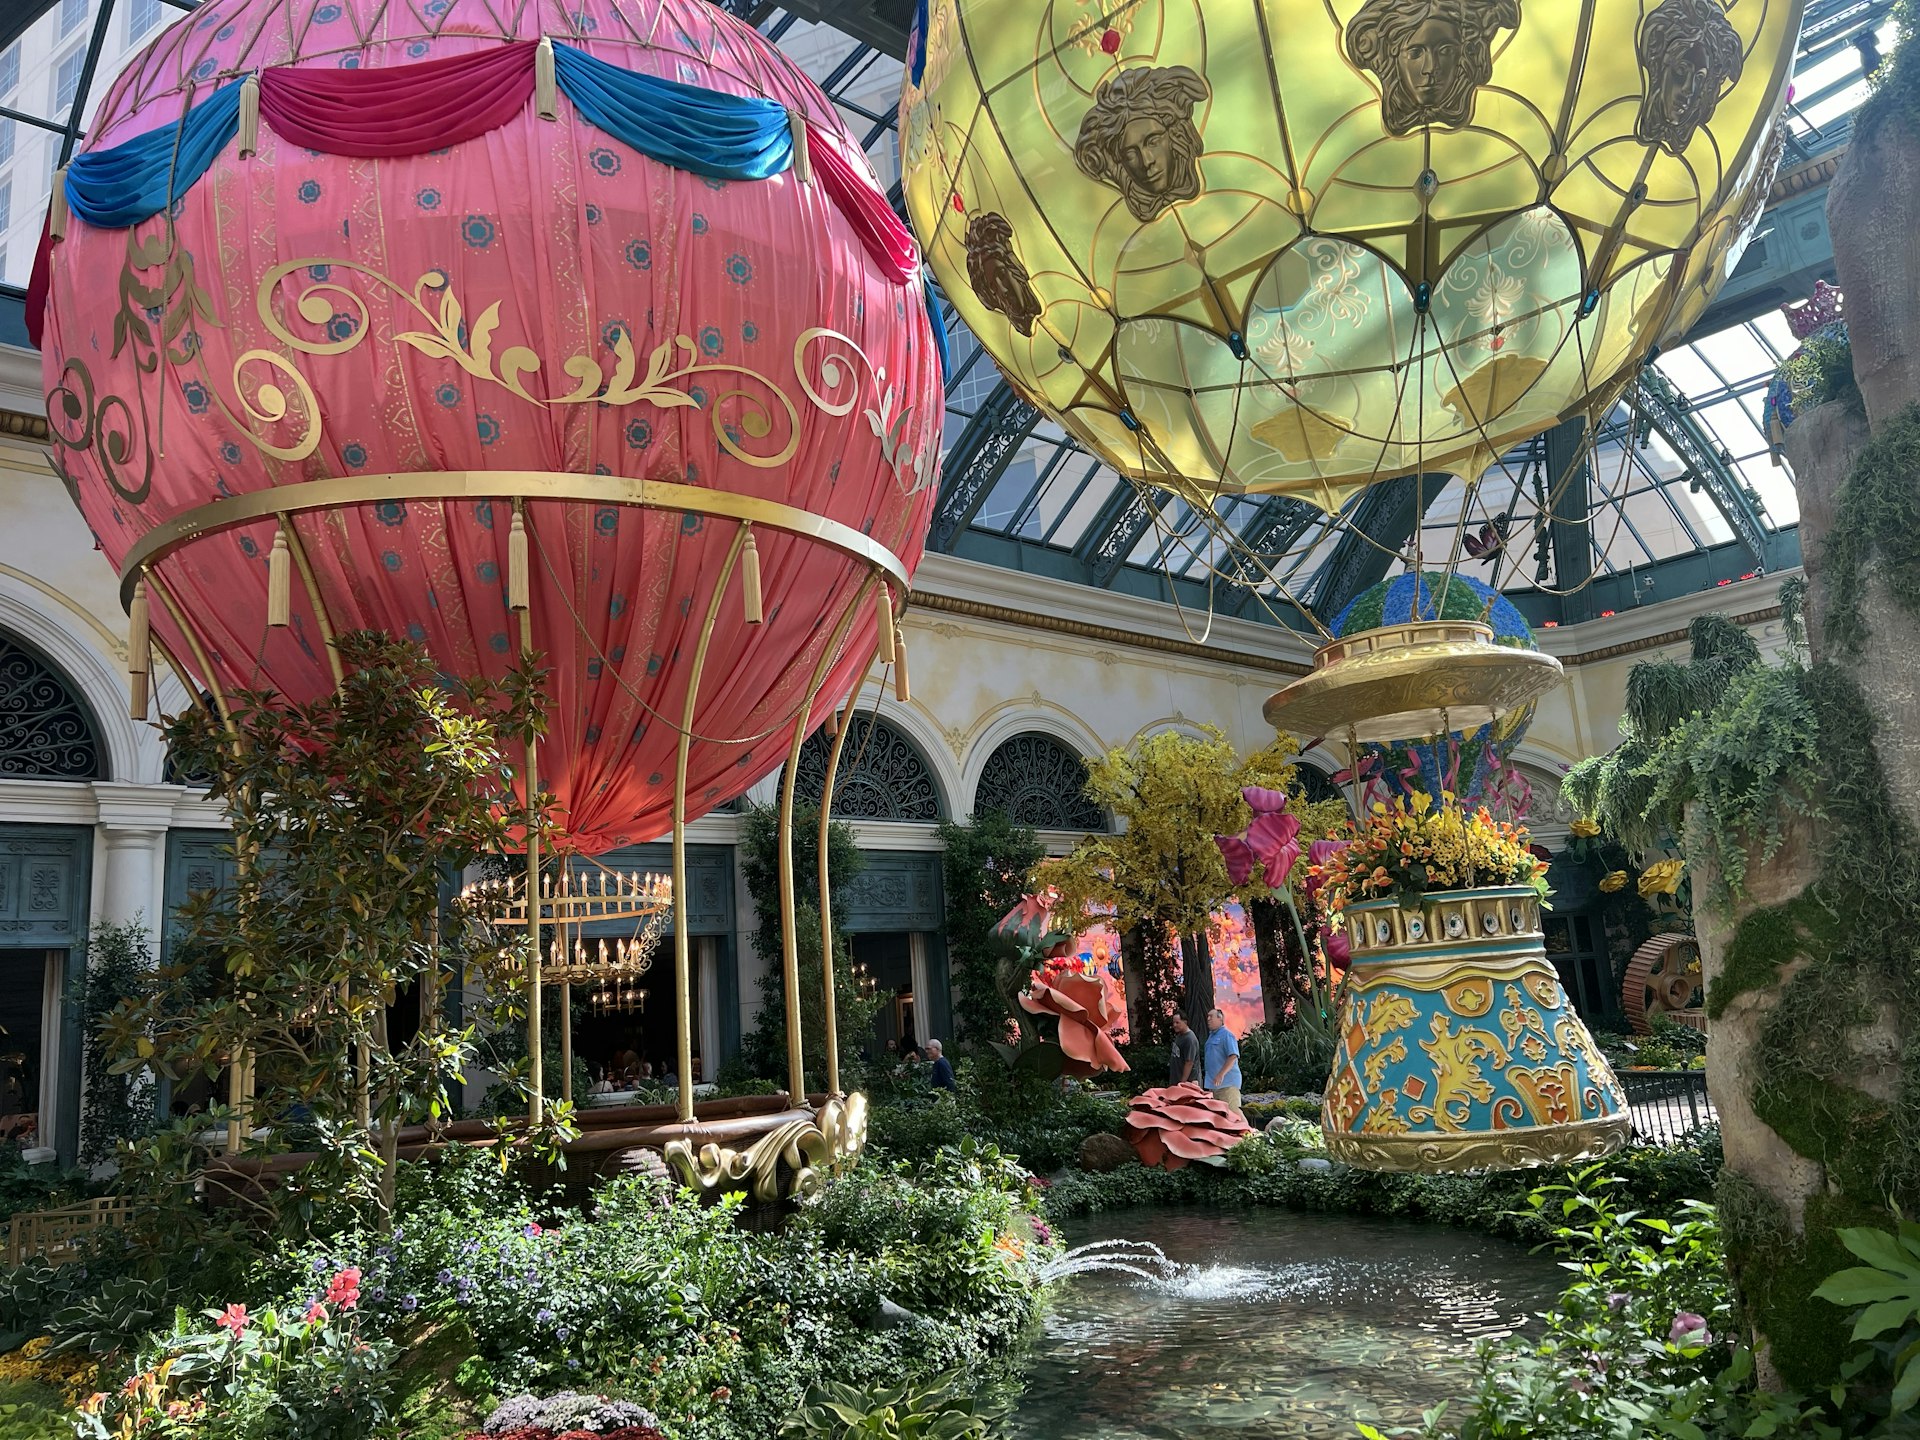 Outside view of the Garden Table (under the red hot-air ballon) located in the Bellagio Conservancy and Botanical Garden. There's a second yellow hot-air ballon suspended above the garden. There are green plants, flowers and small pond in the foreground.